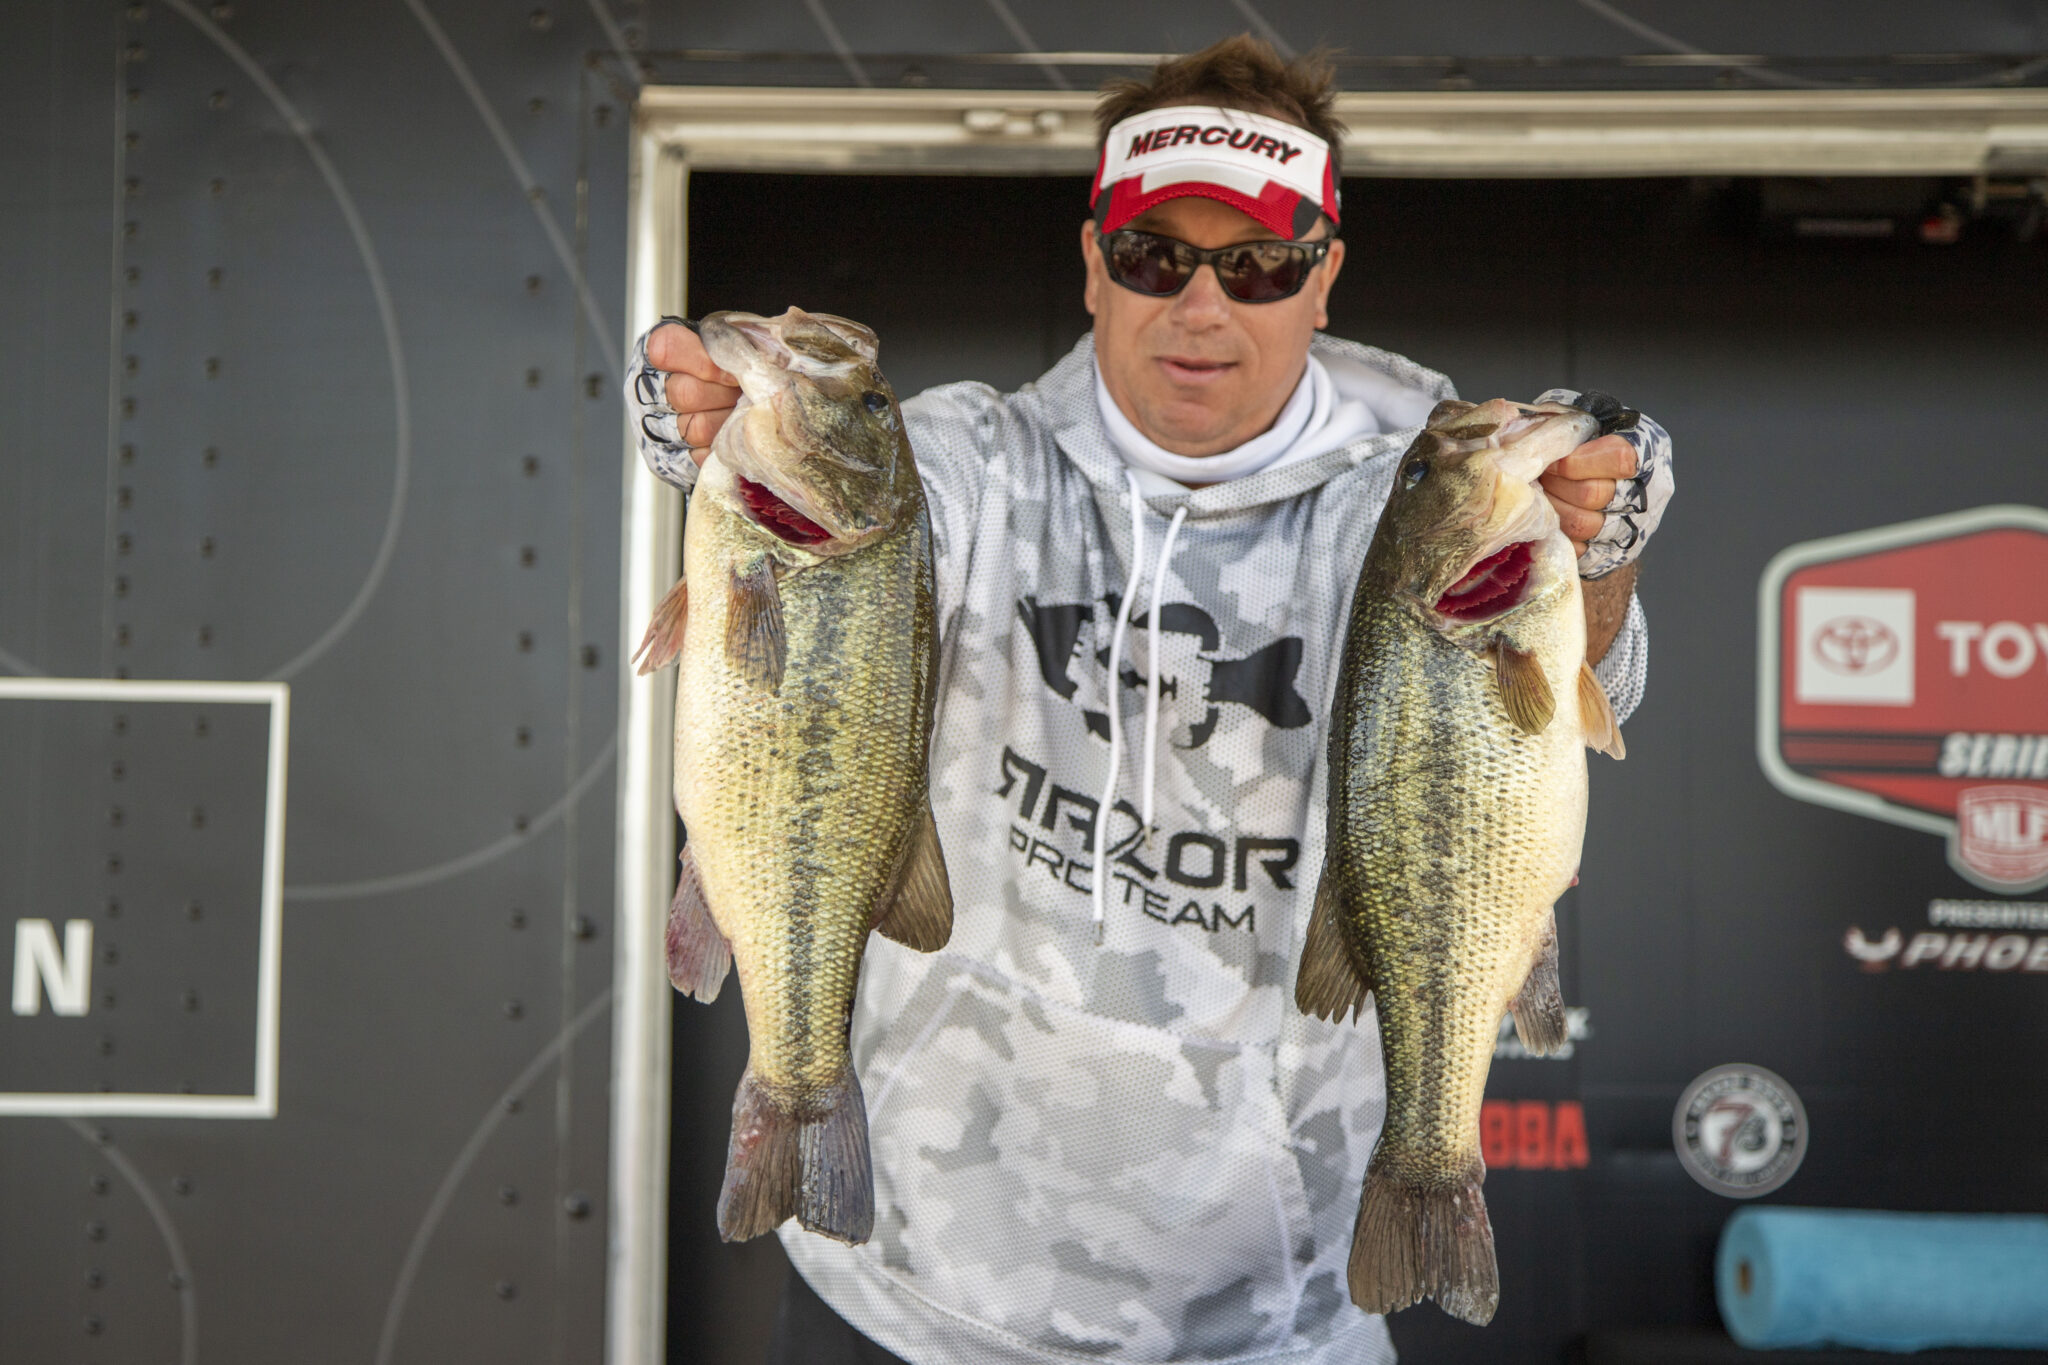 Top 10 baits from Toledo Bend - Major League Fishing